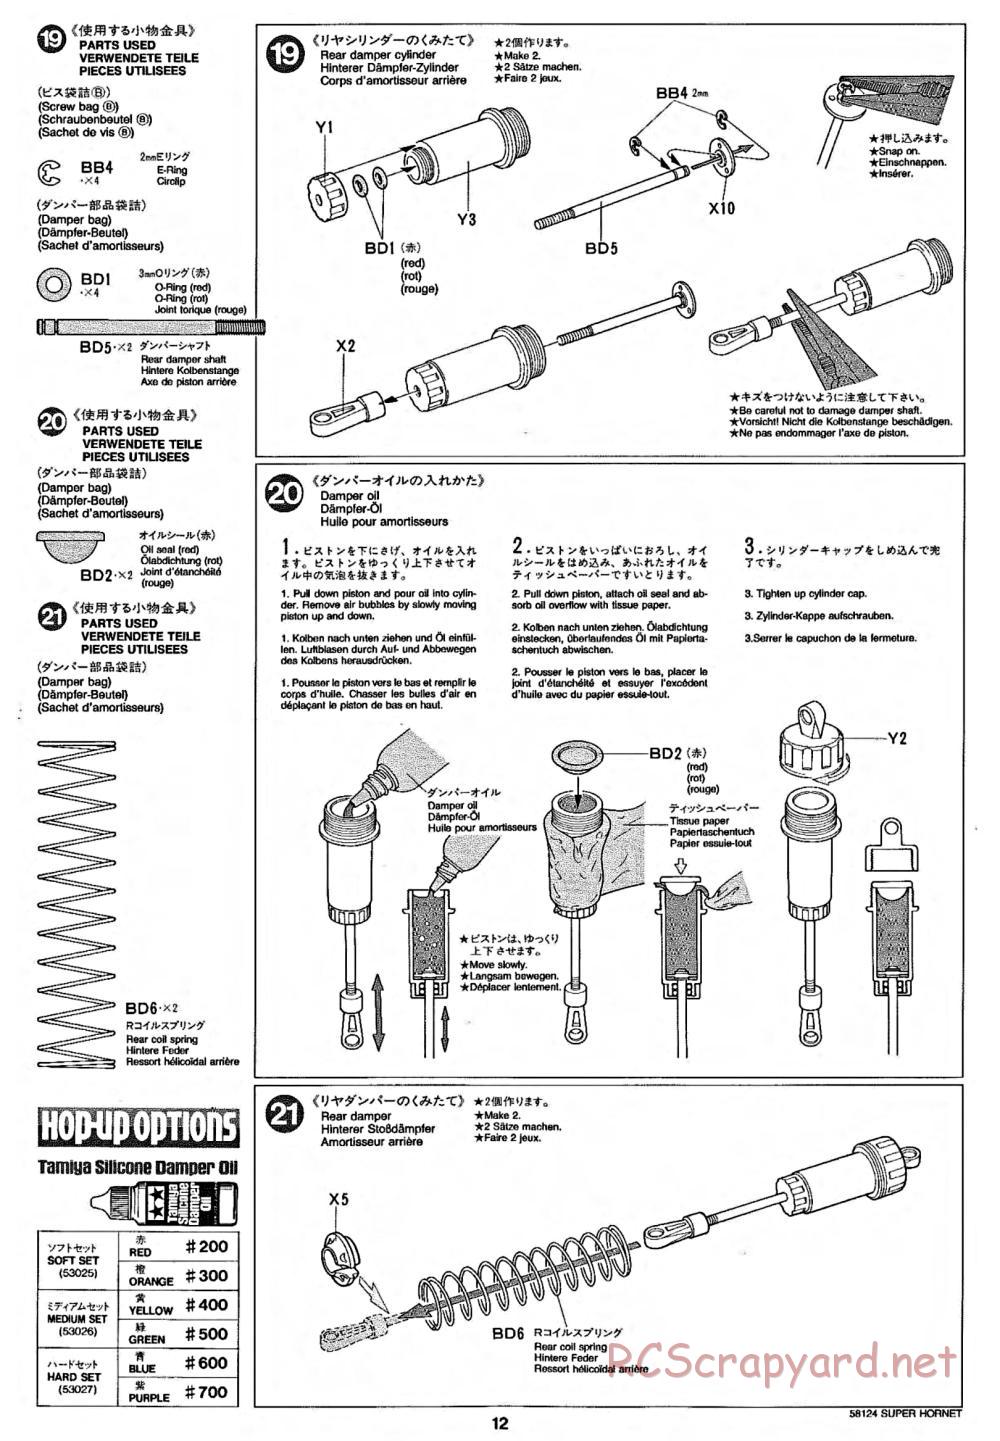 Tamiya - Super Hornet Chassis - Manual - Page 12